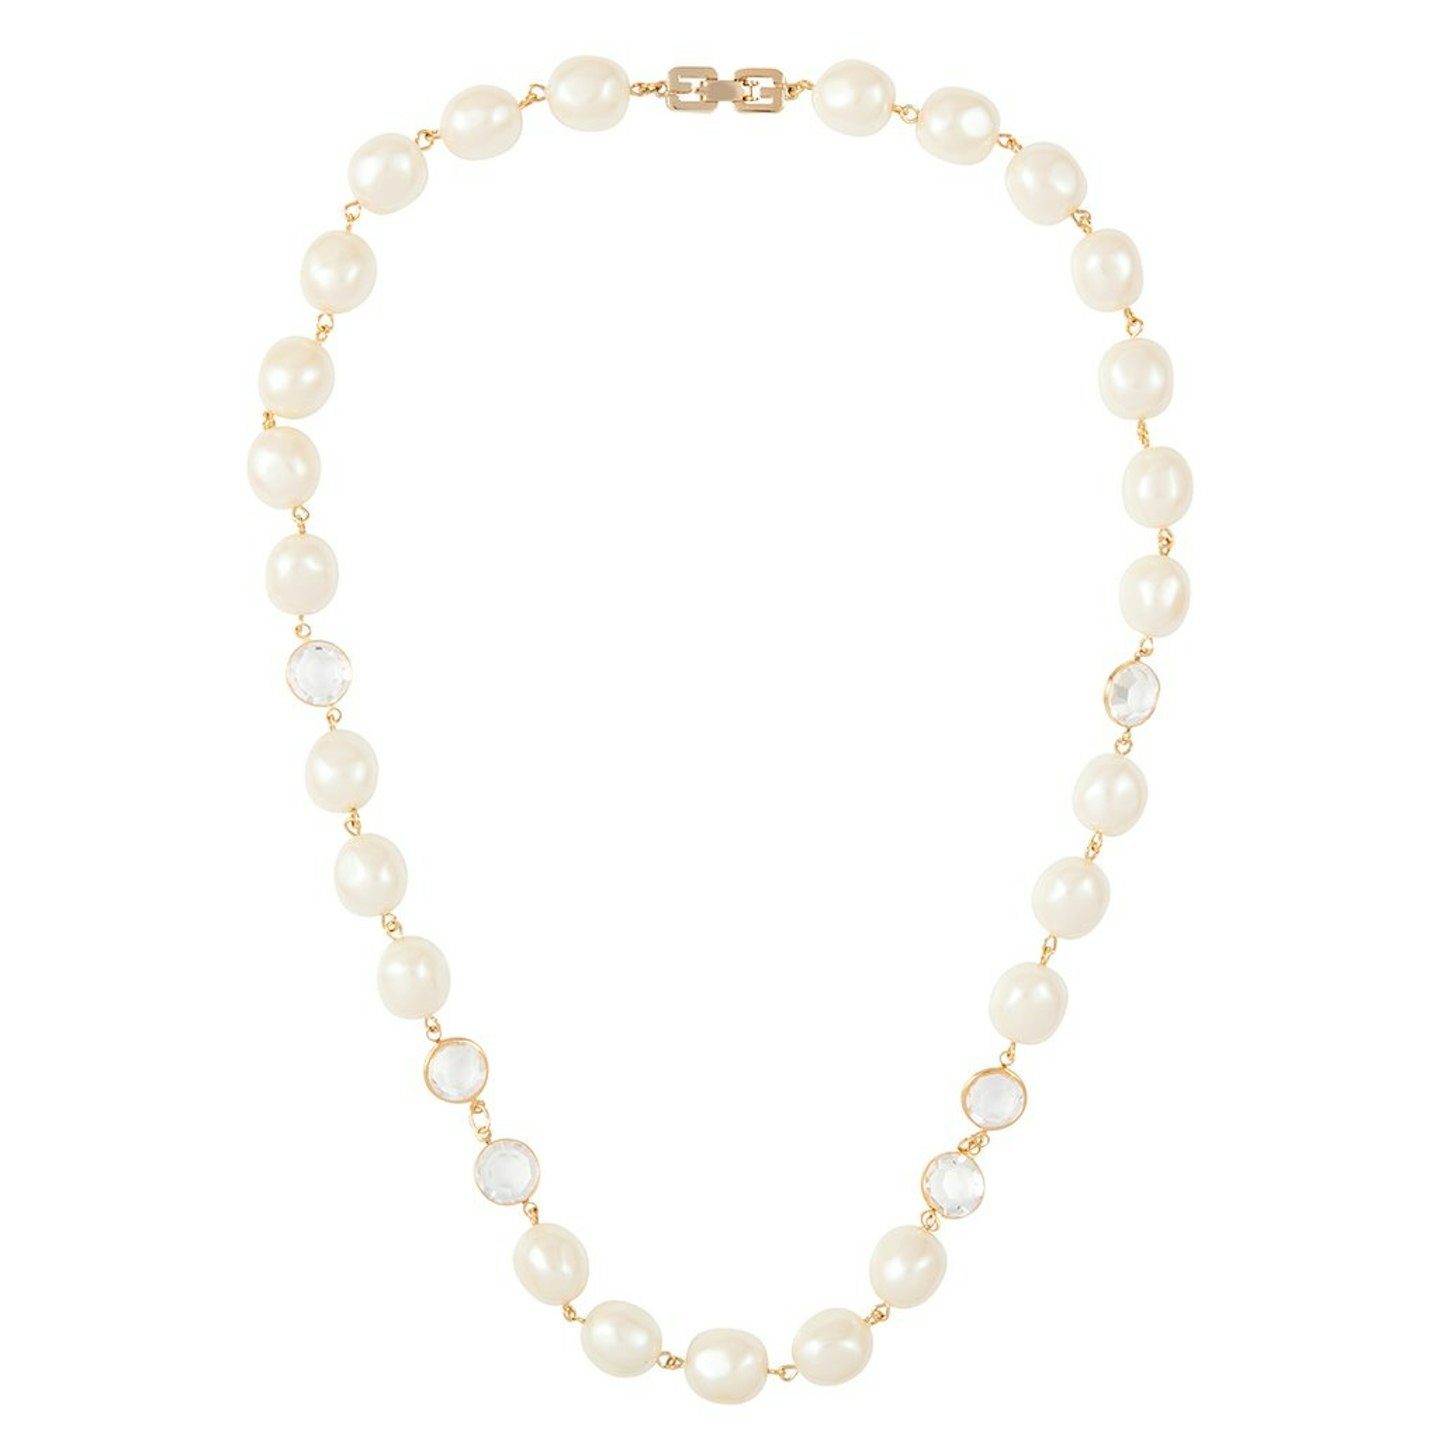 Givenchy, Vintage Faux-Pearl Necklace, £275